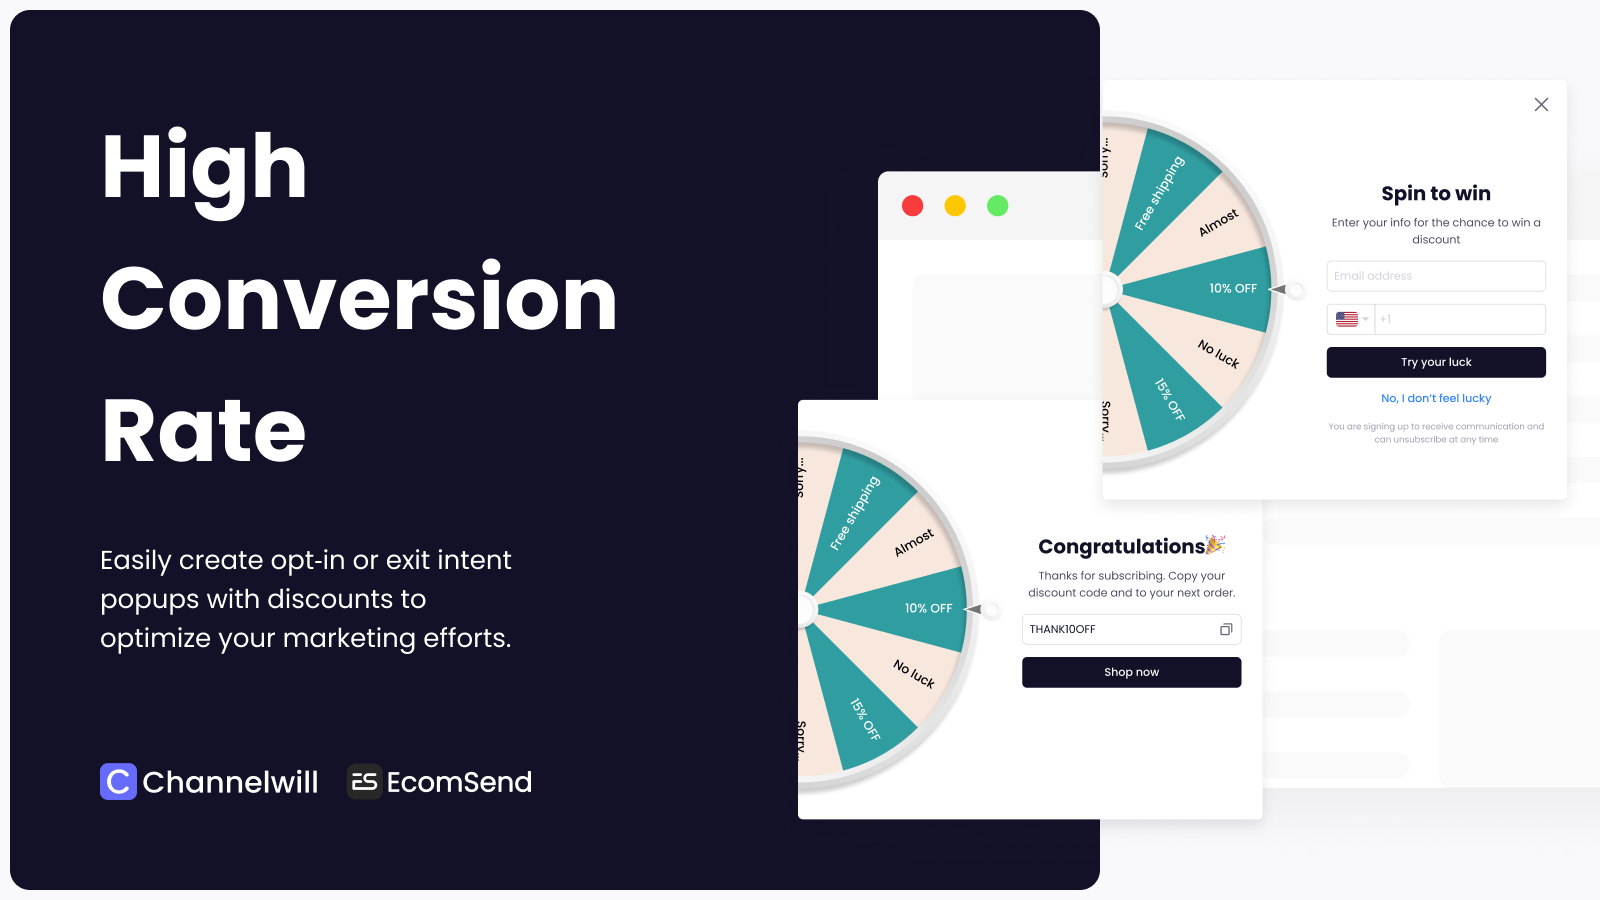 Attract visitors through gamification, get 3X conversion rate